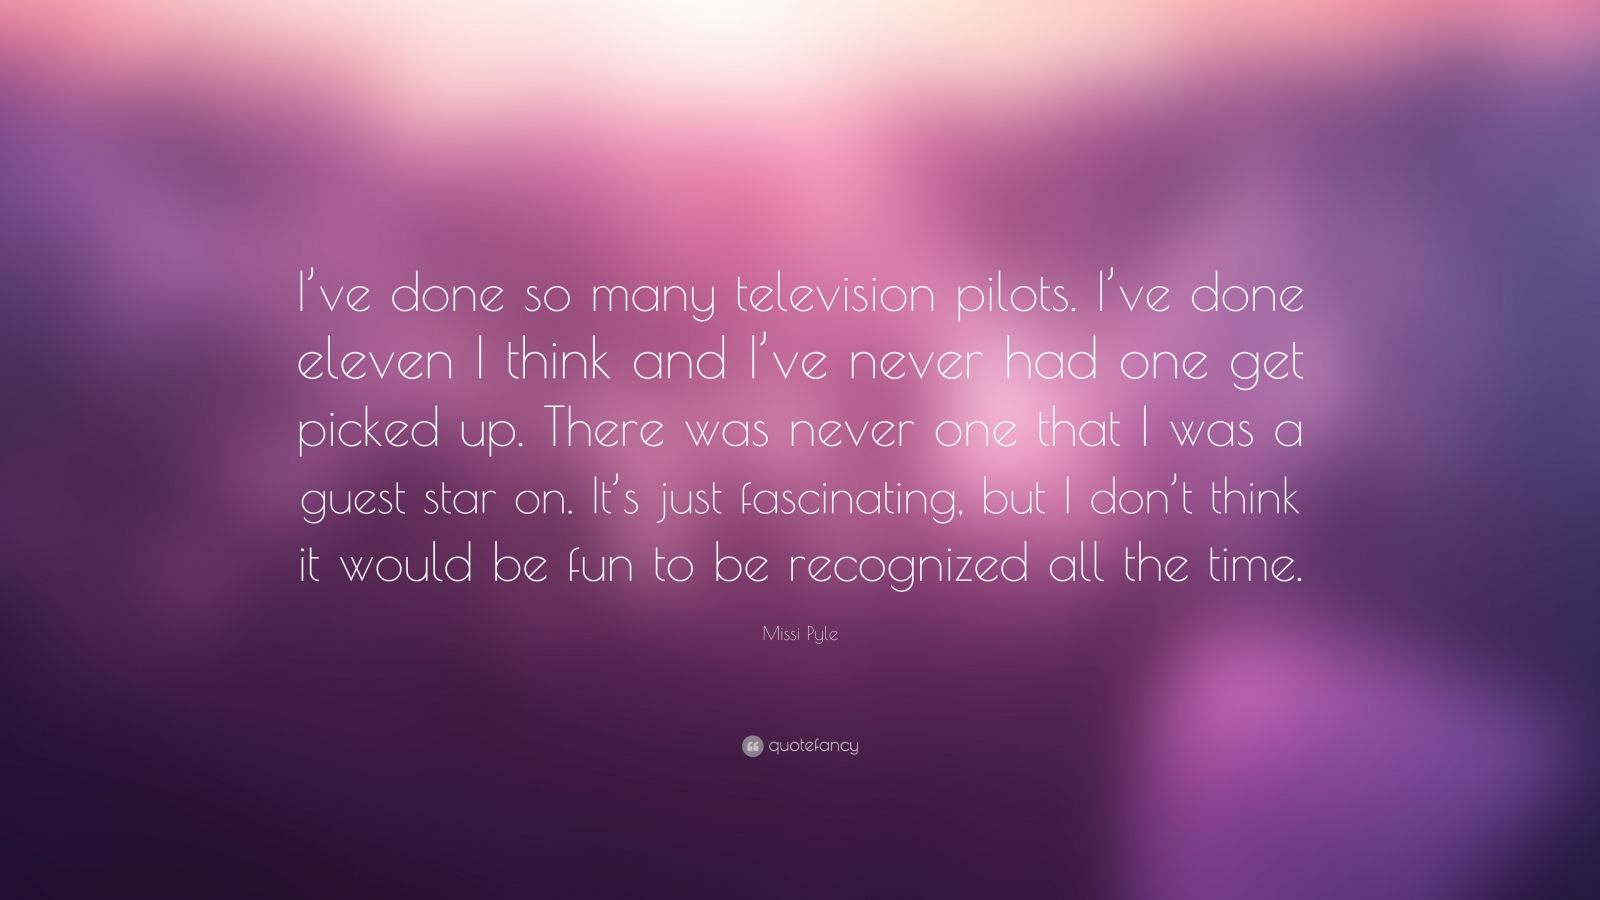 Missi Pyle Quote: “I’ve done so many television pilots. I’ve done ...